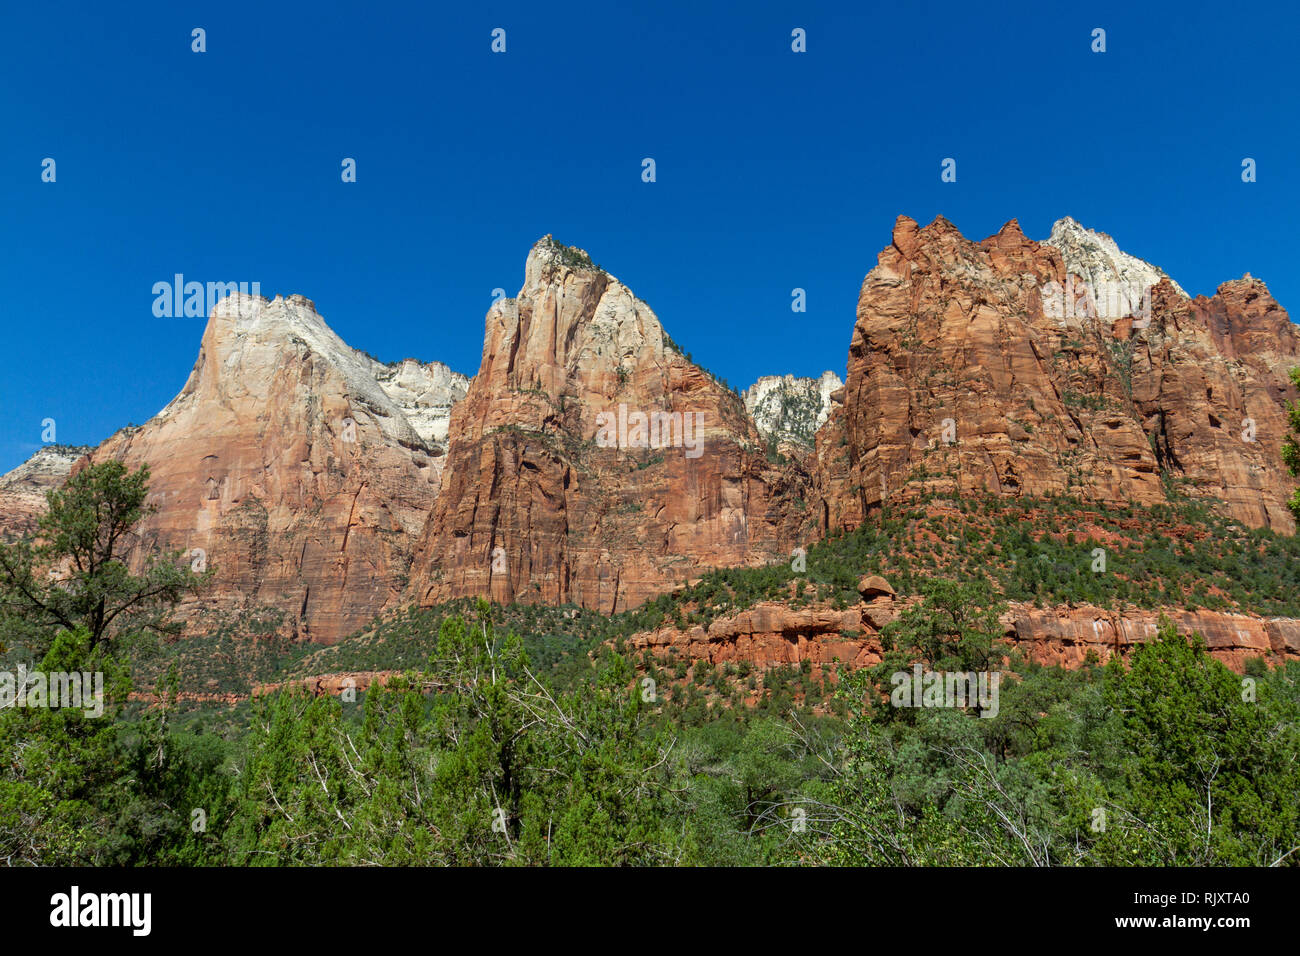 The Court of the Patriarchs (L-R: Abraham Peak, Isaac Peak, and Jacob Peak) in Zion National Park, Springdale, Utah, United States. Stock Photo